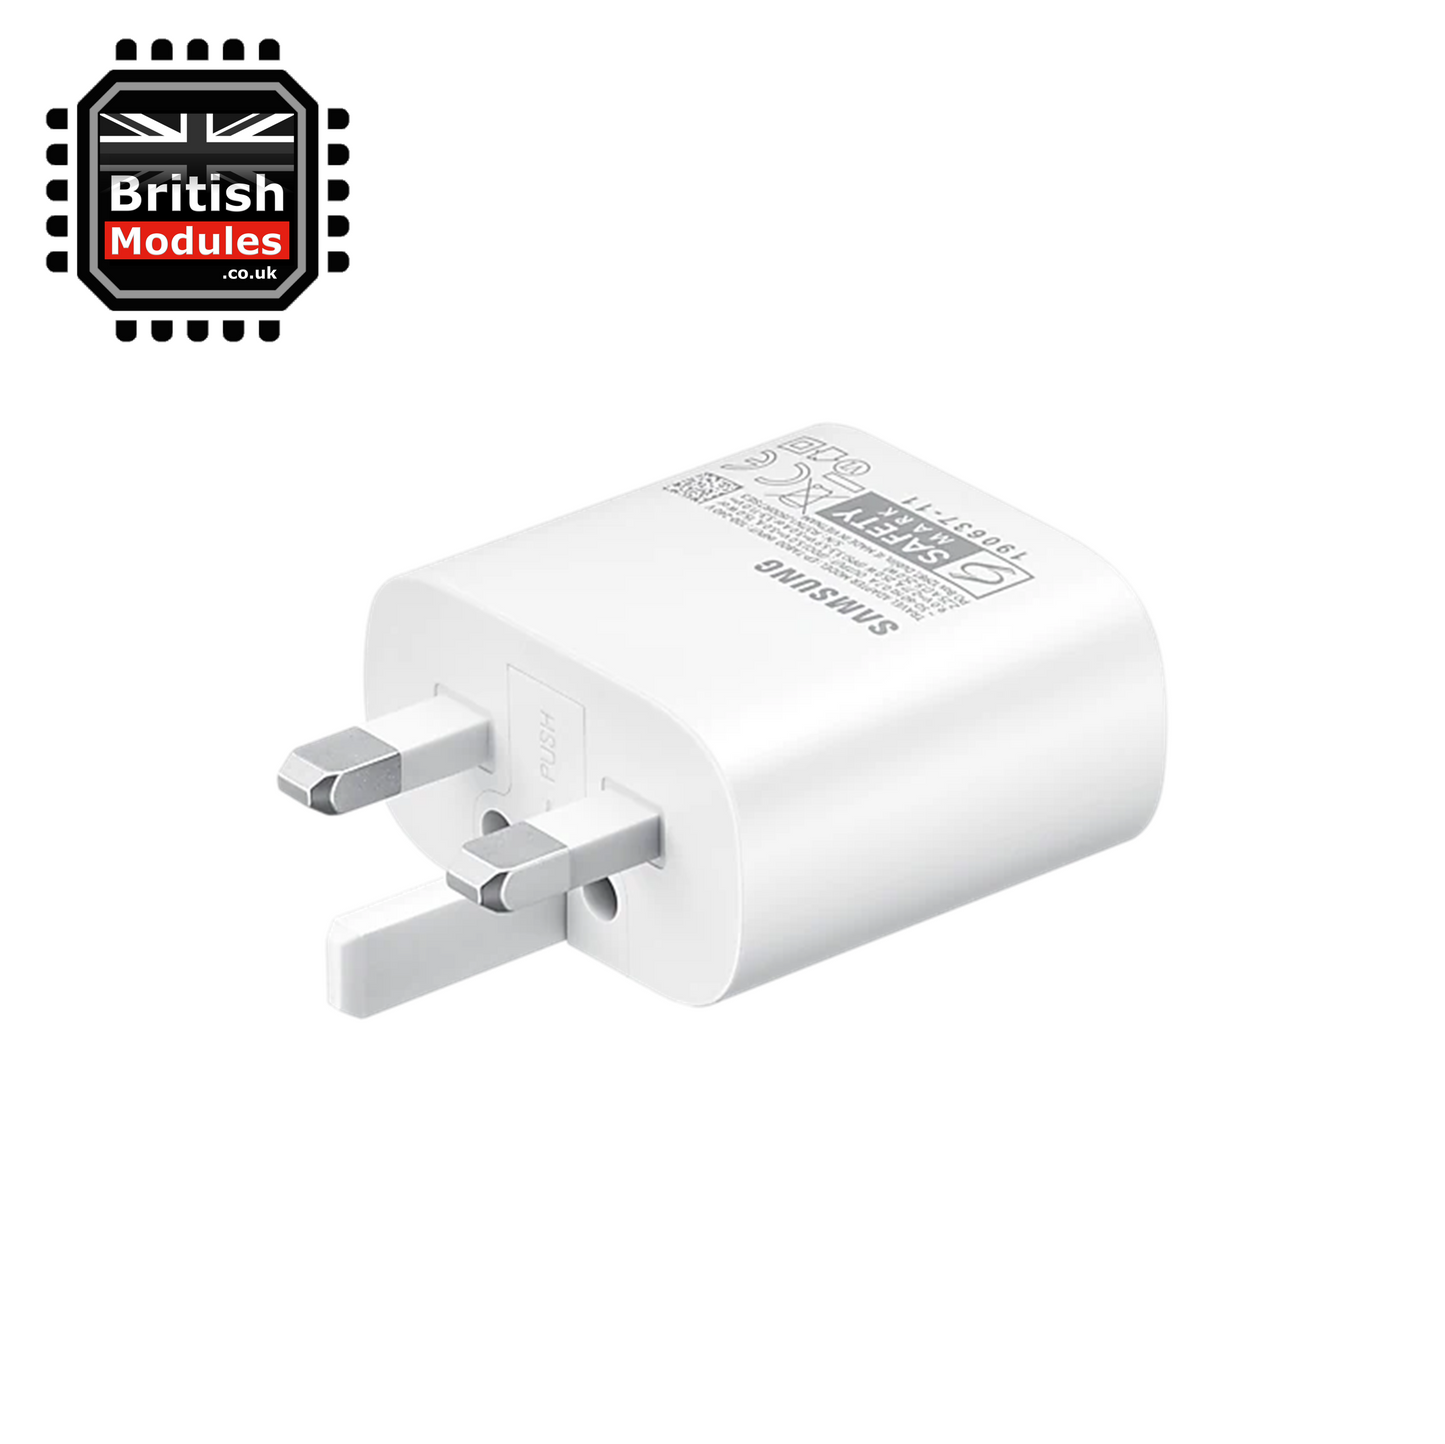 Samsung 25W EP-TA800 3 Pin UK Super Fast Charging Travel Mains Charger Power Adapter White with USB-C to USB-C Cable